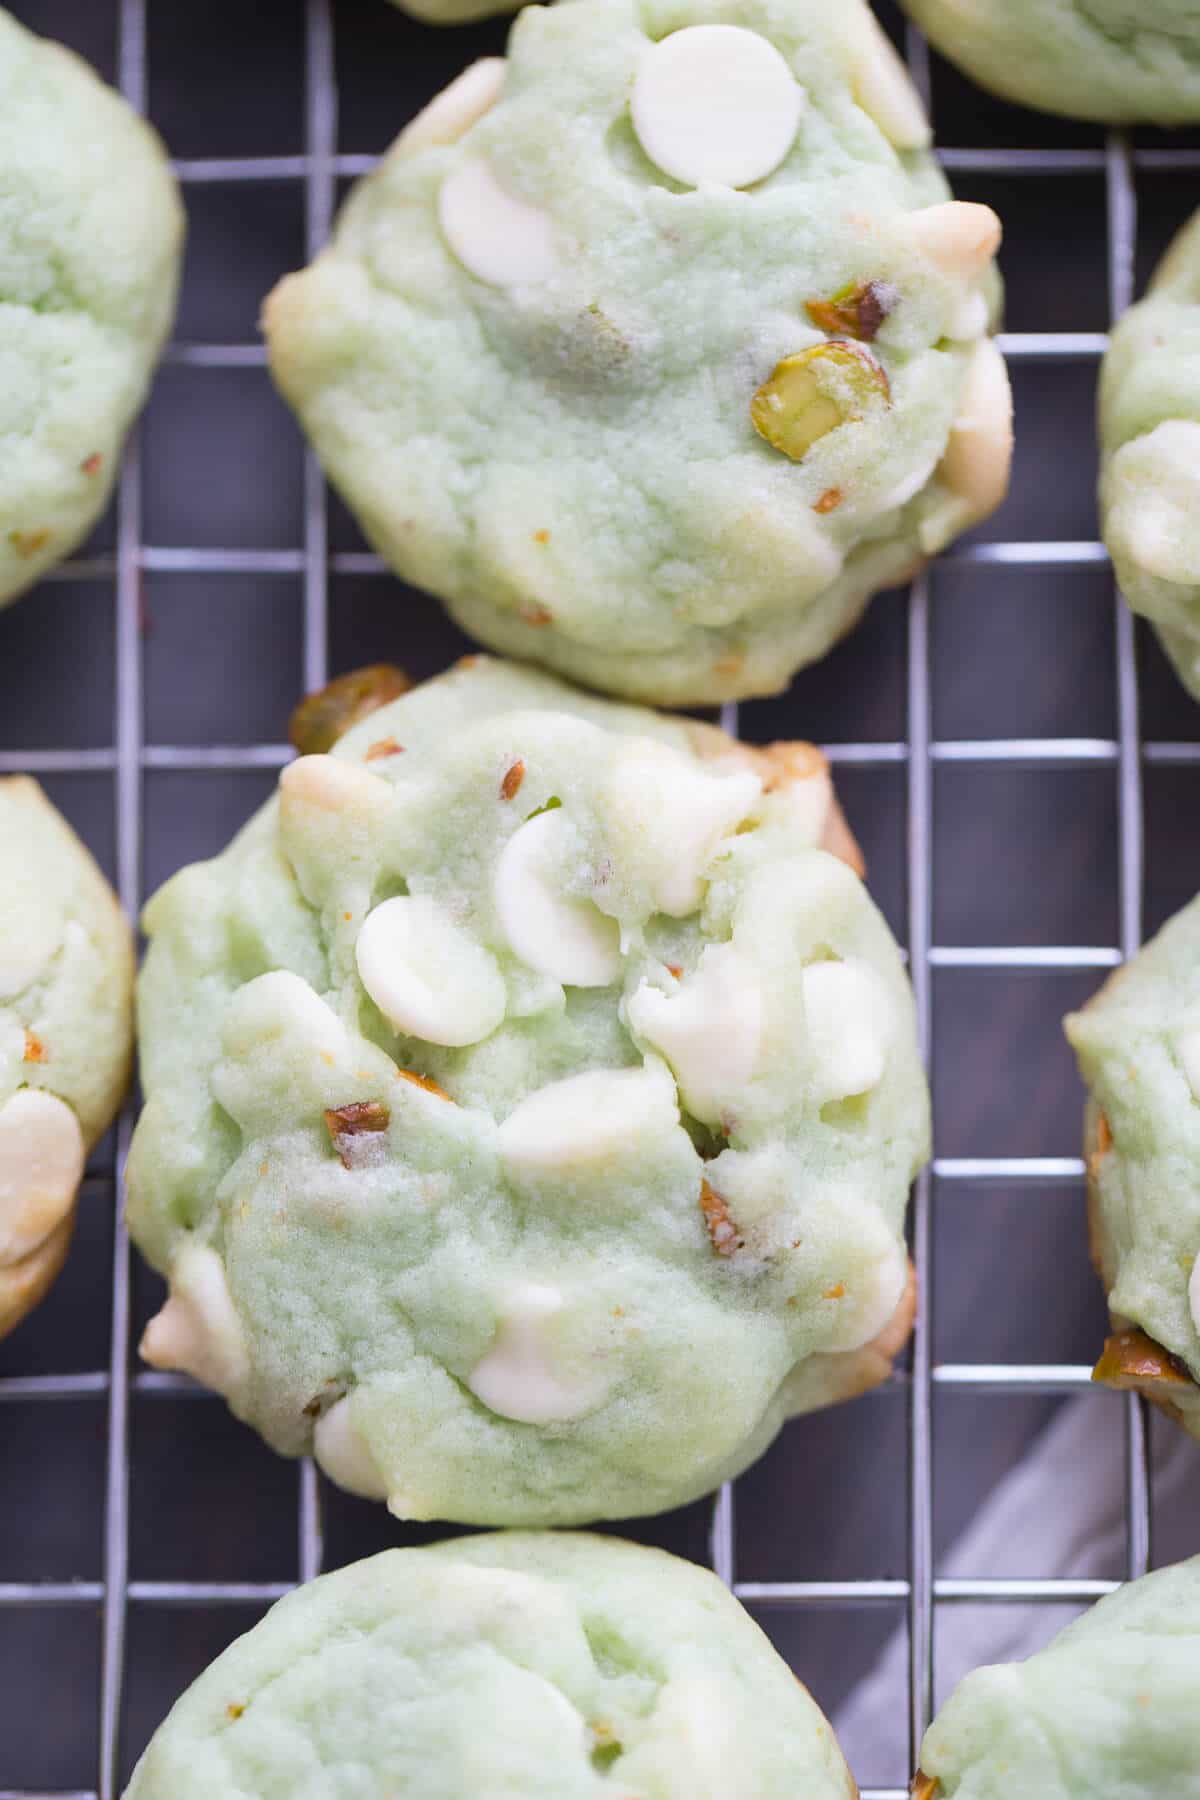 Pudding cookies are easy and fun to make! Pistachio pudding turns these simple cookies into a festive hue that everyone will love!